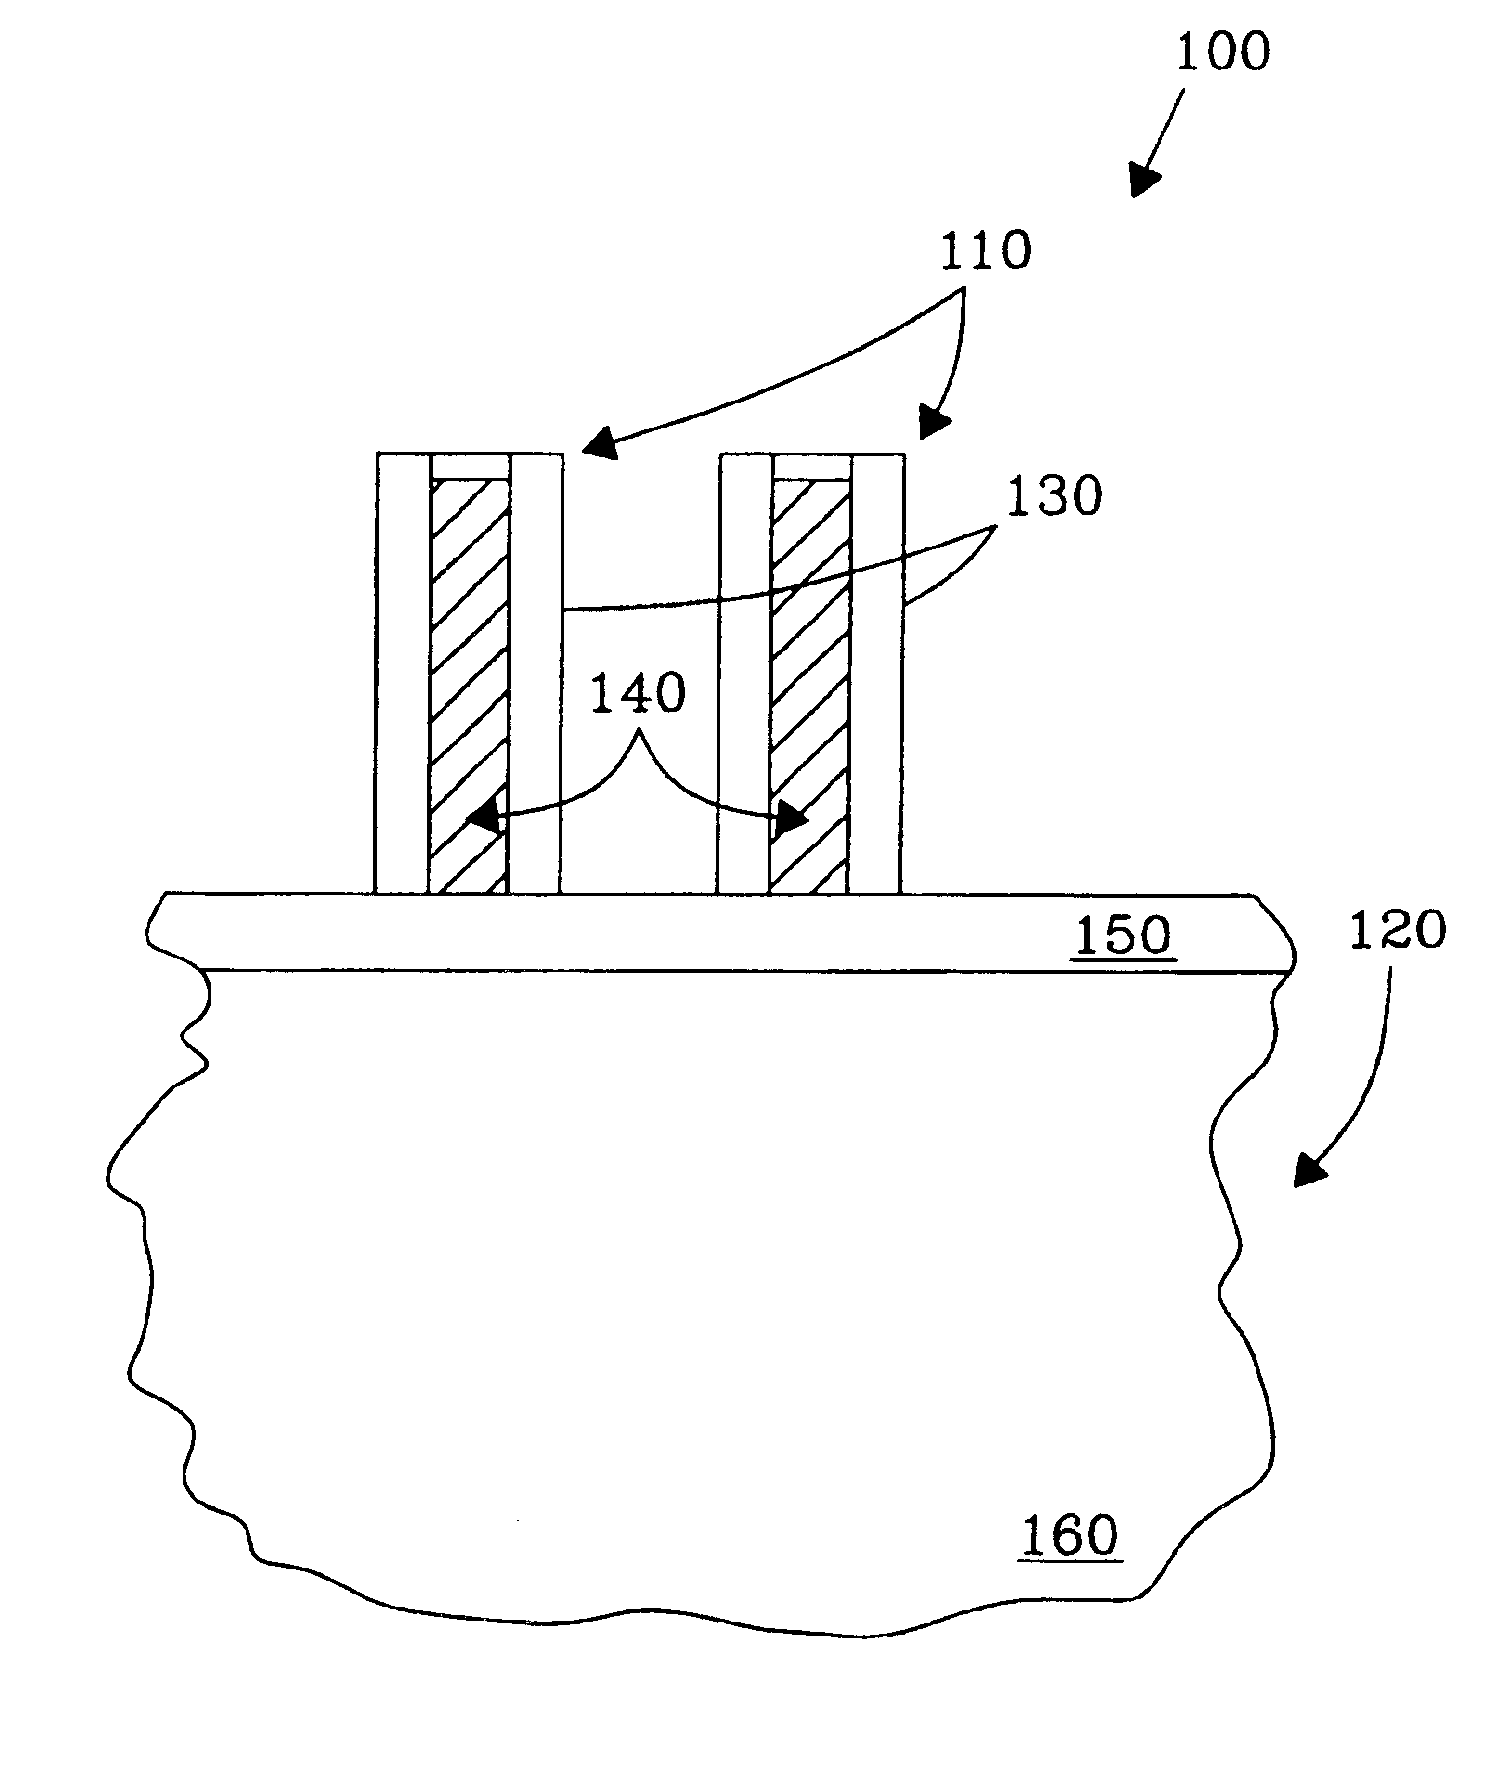 Method of making carbon nanotubes on a substrate